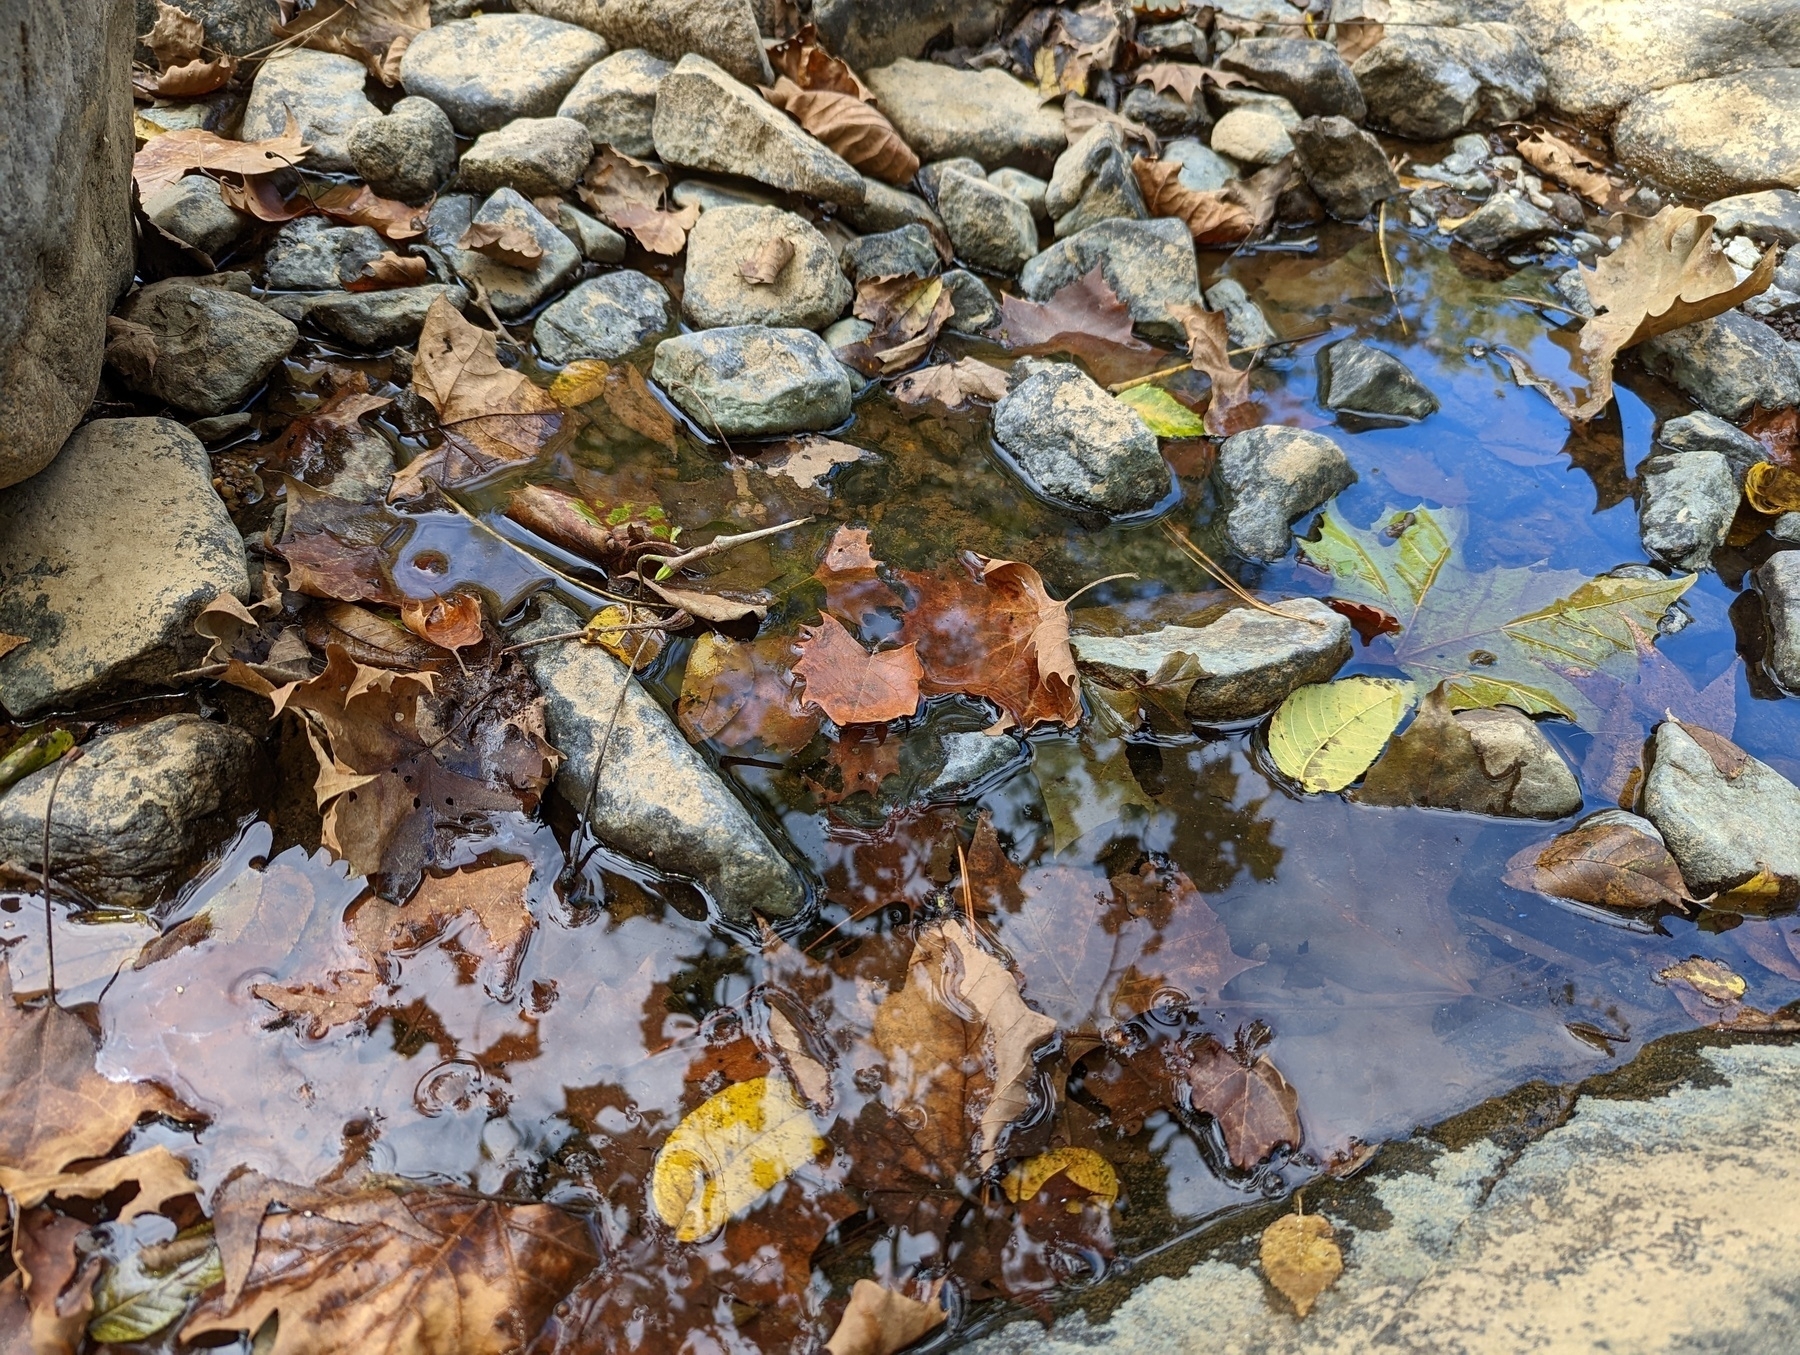 A close-up of rocks and fallen leaves in shallow water at the edge of the river.